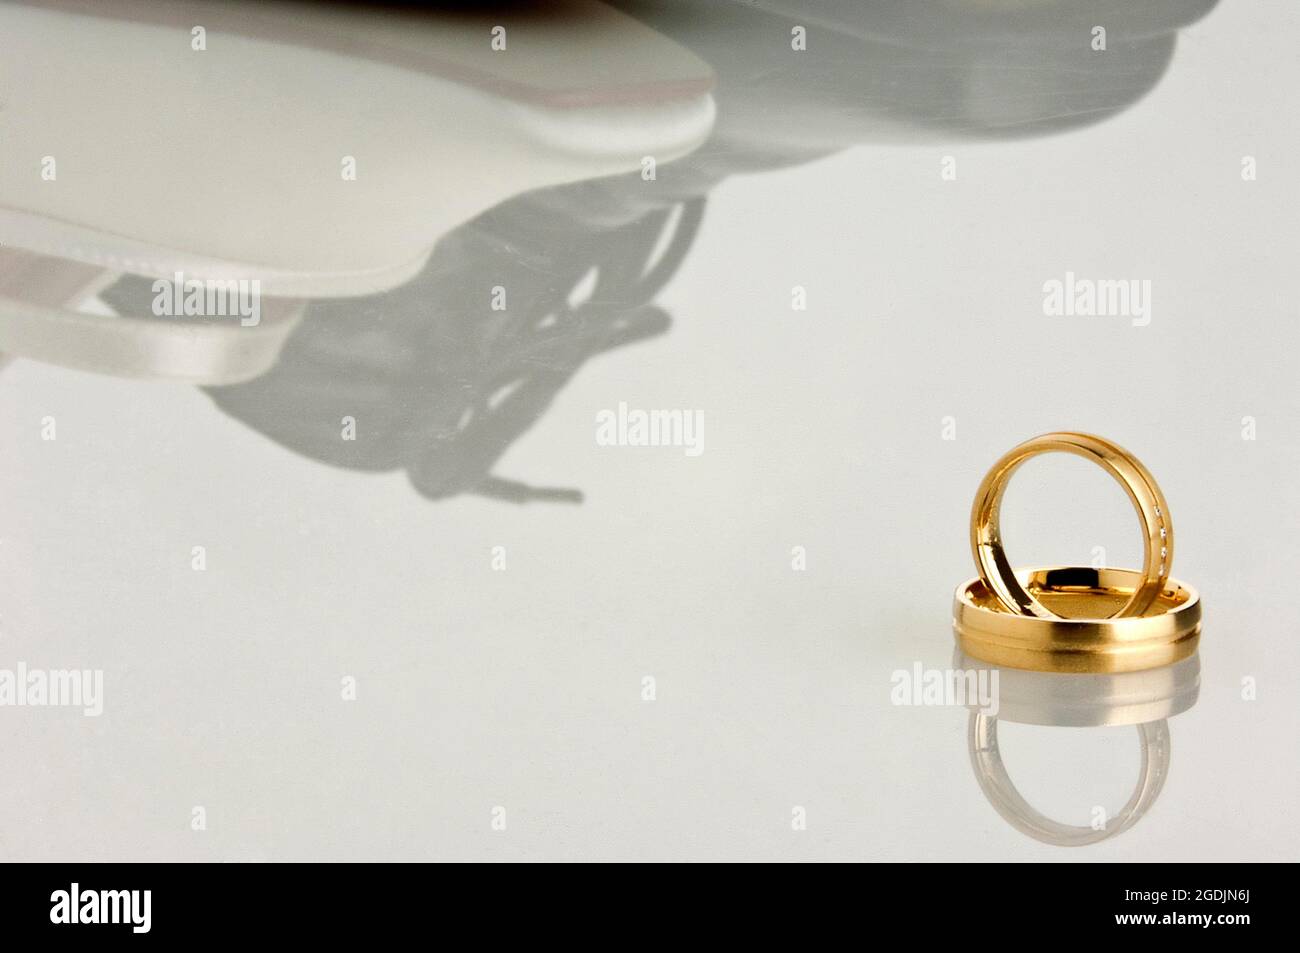 wedding shoes and golden wedding rings Stock Photo